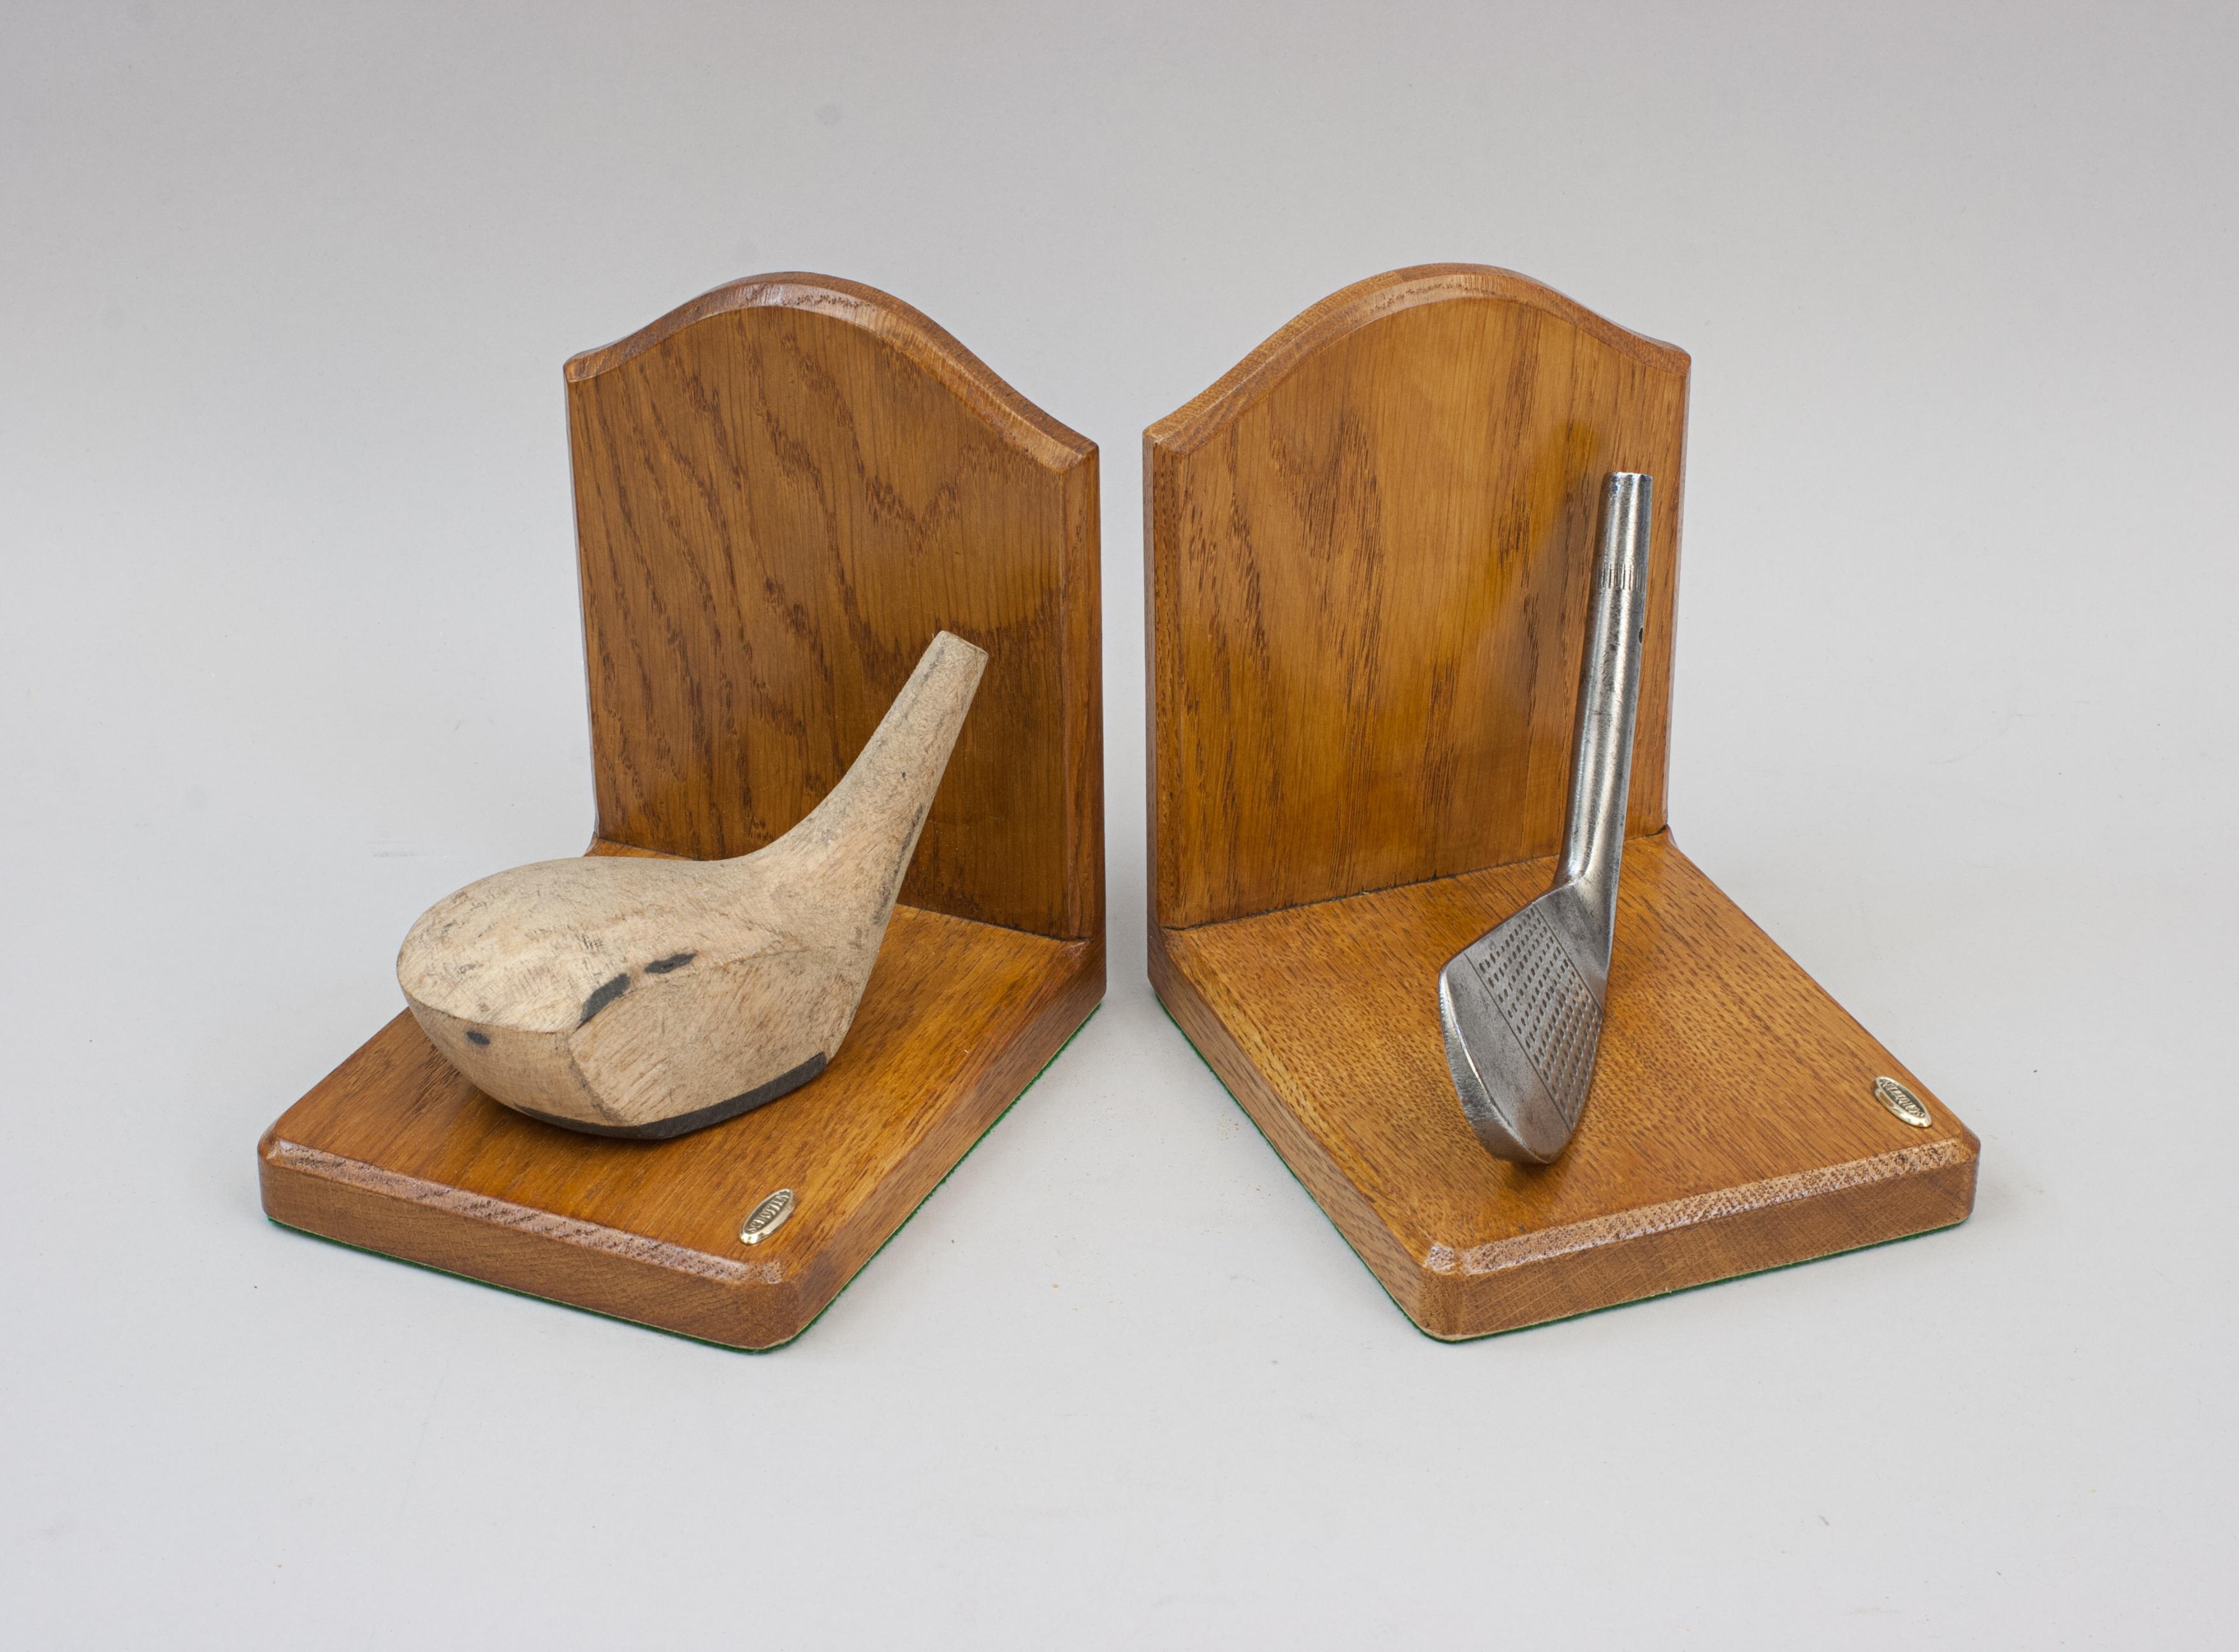 Robert Simpson Golf Bookends In Good Condition For Sale In Oxfordshire, GB